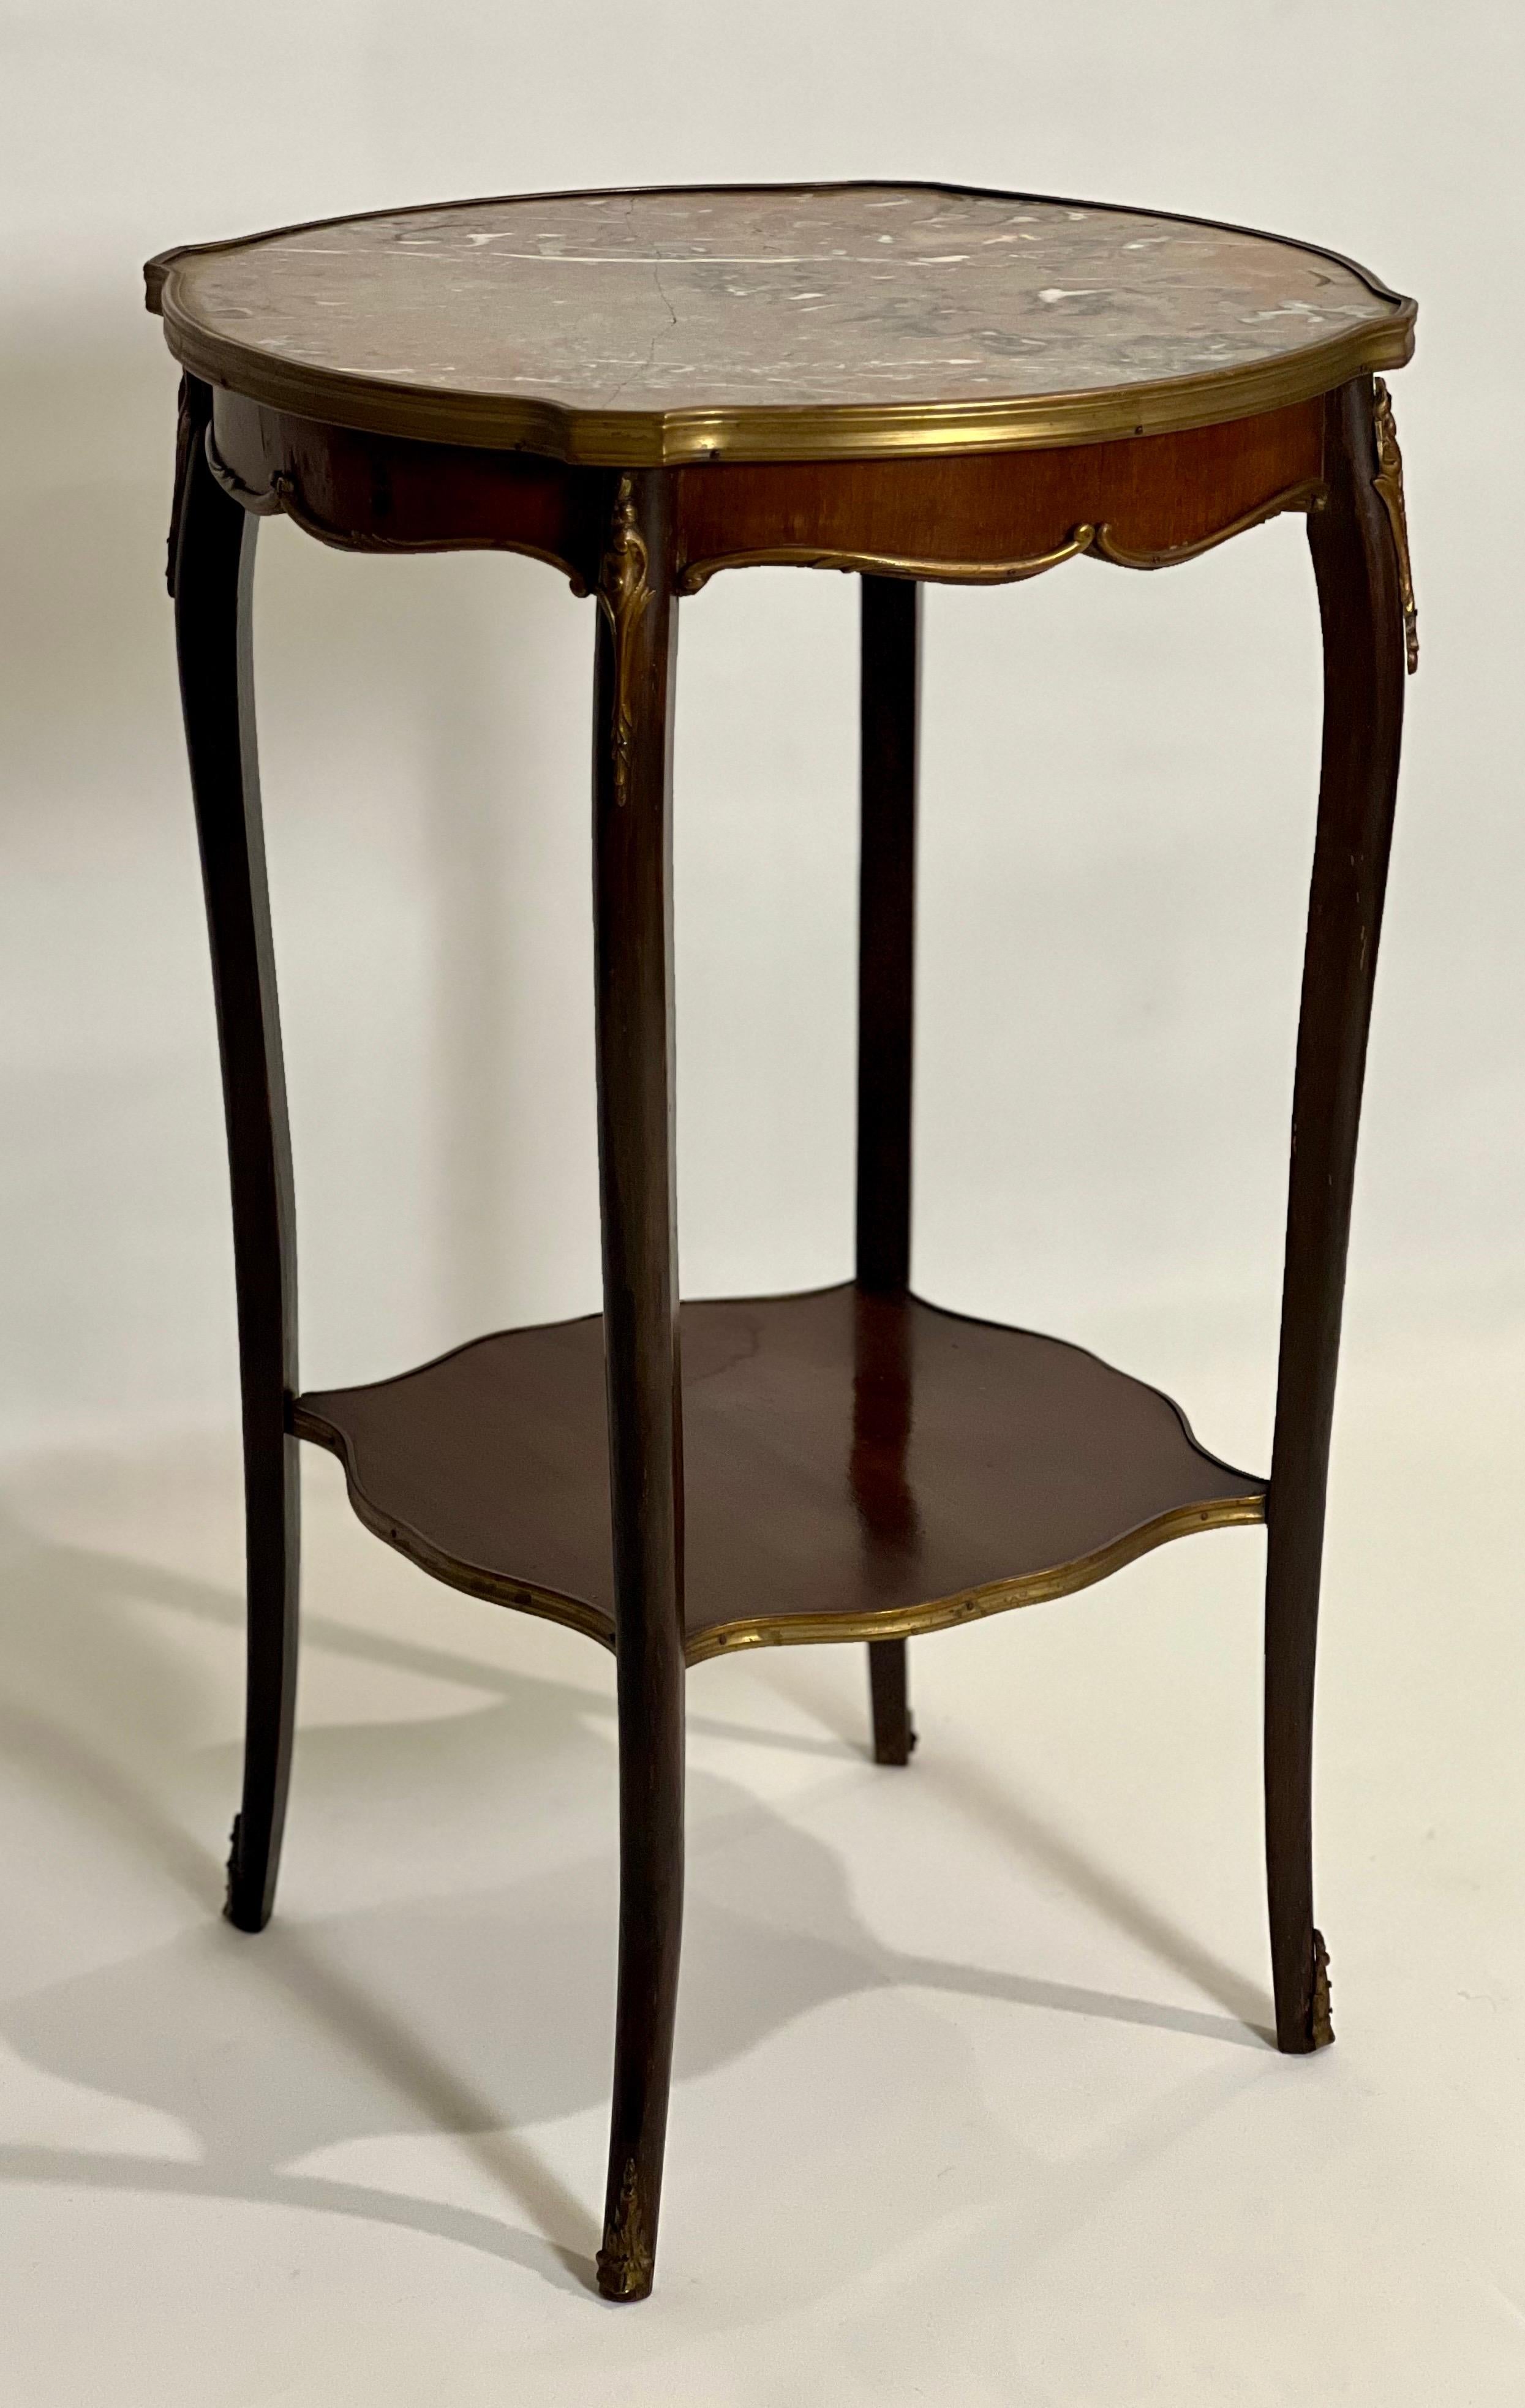 Antique French Louis XV style marble top bronze-mounted side table, c. 1890-1900.

A well-appointed French table with fine bronze embellishments, a fitted griotte marble top, lithe cabriole legs and lower tier. It boasts all the hallmarks of